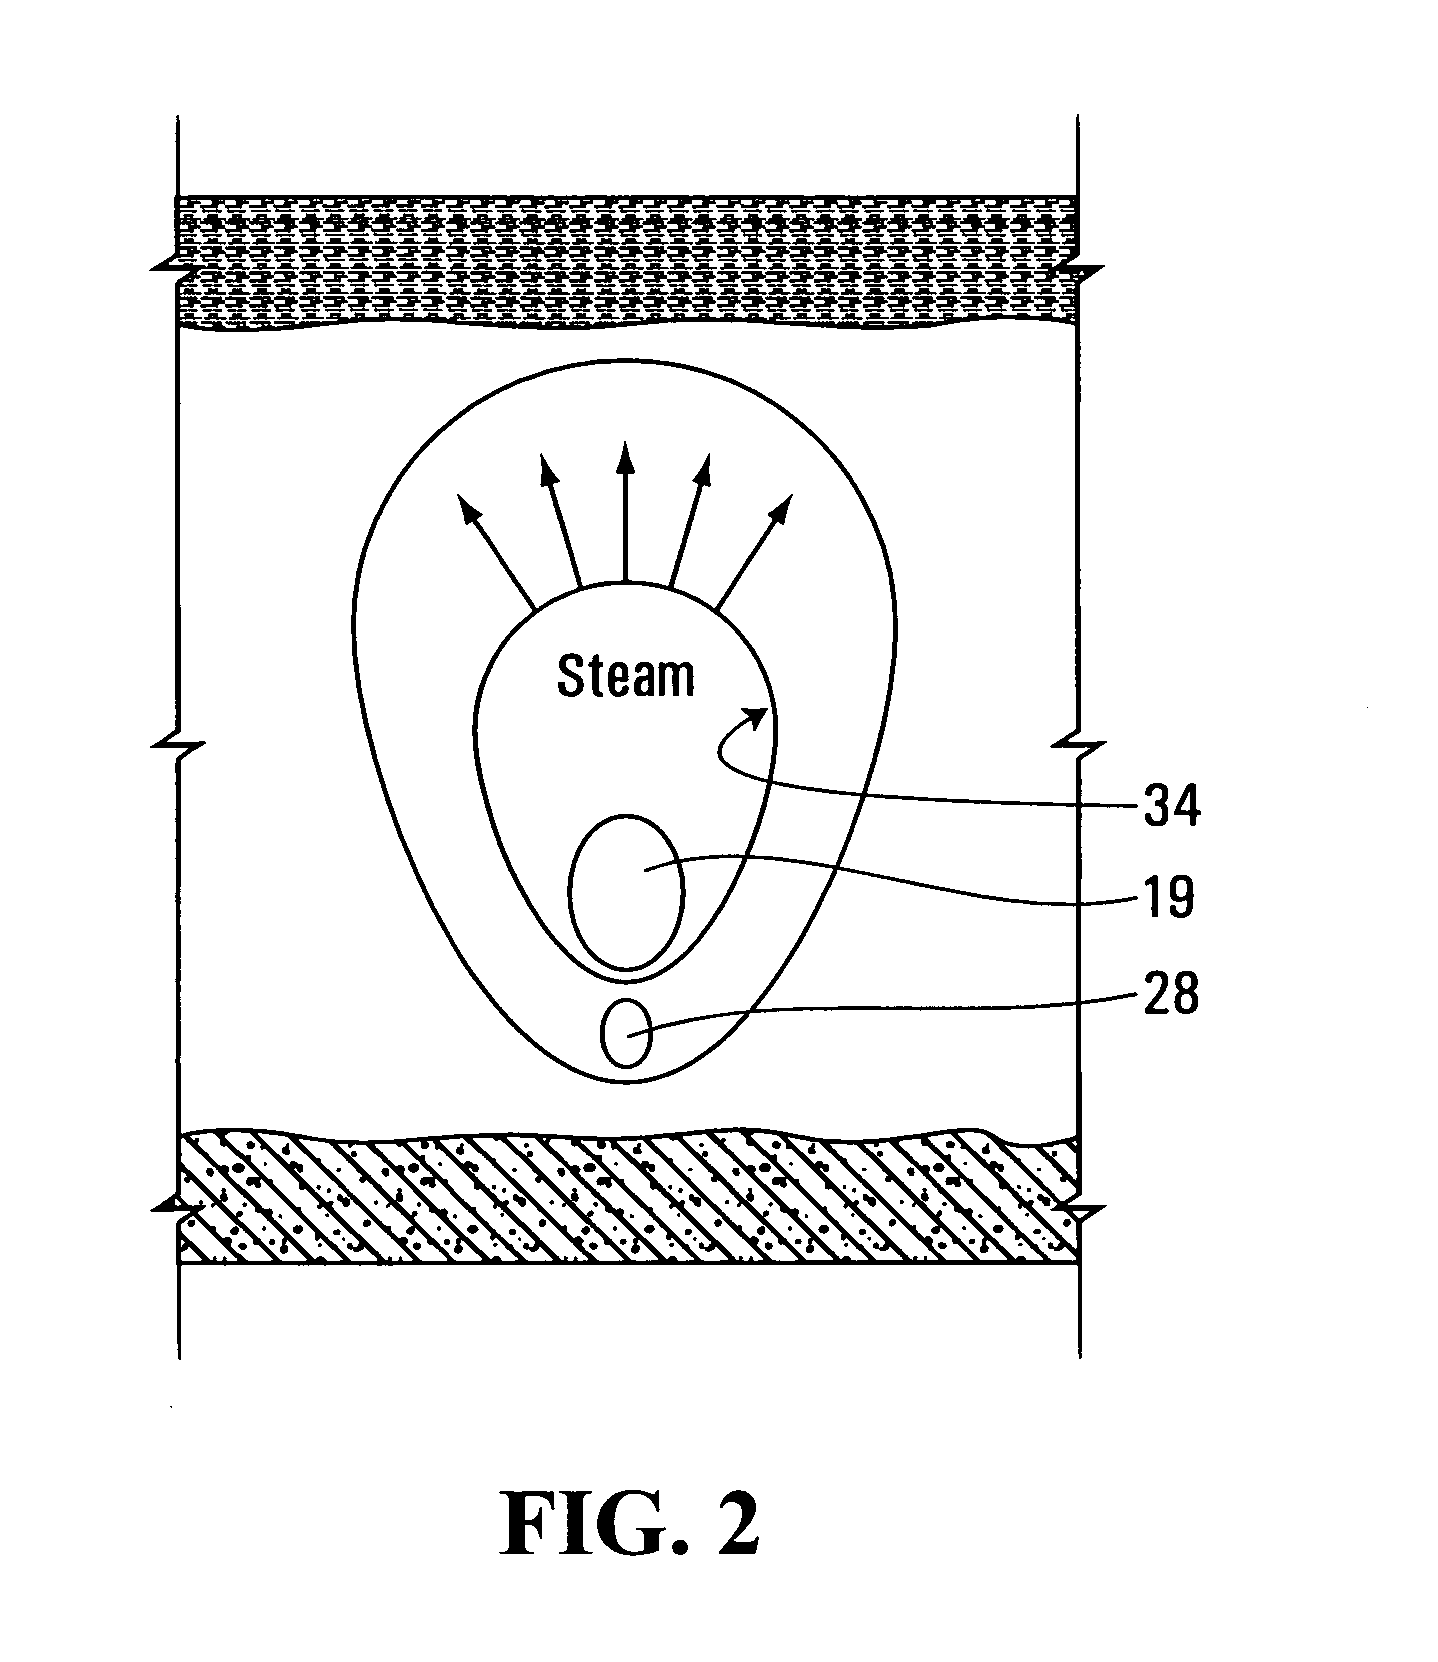 Pressure sensor arrangement using an optical fiber and methodologies for performing an analysis of a subterranean formation